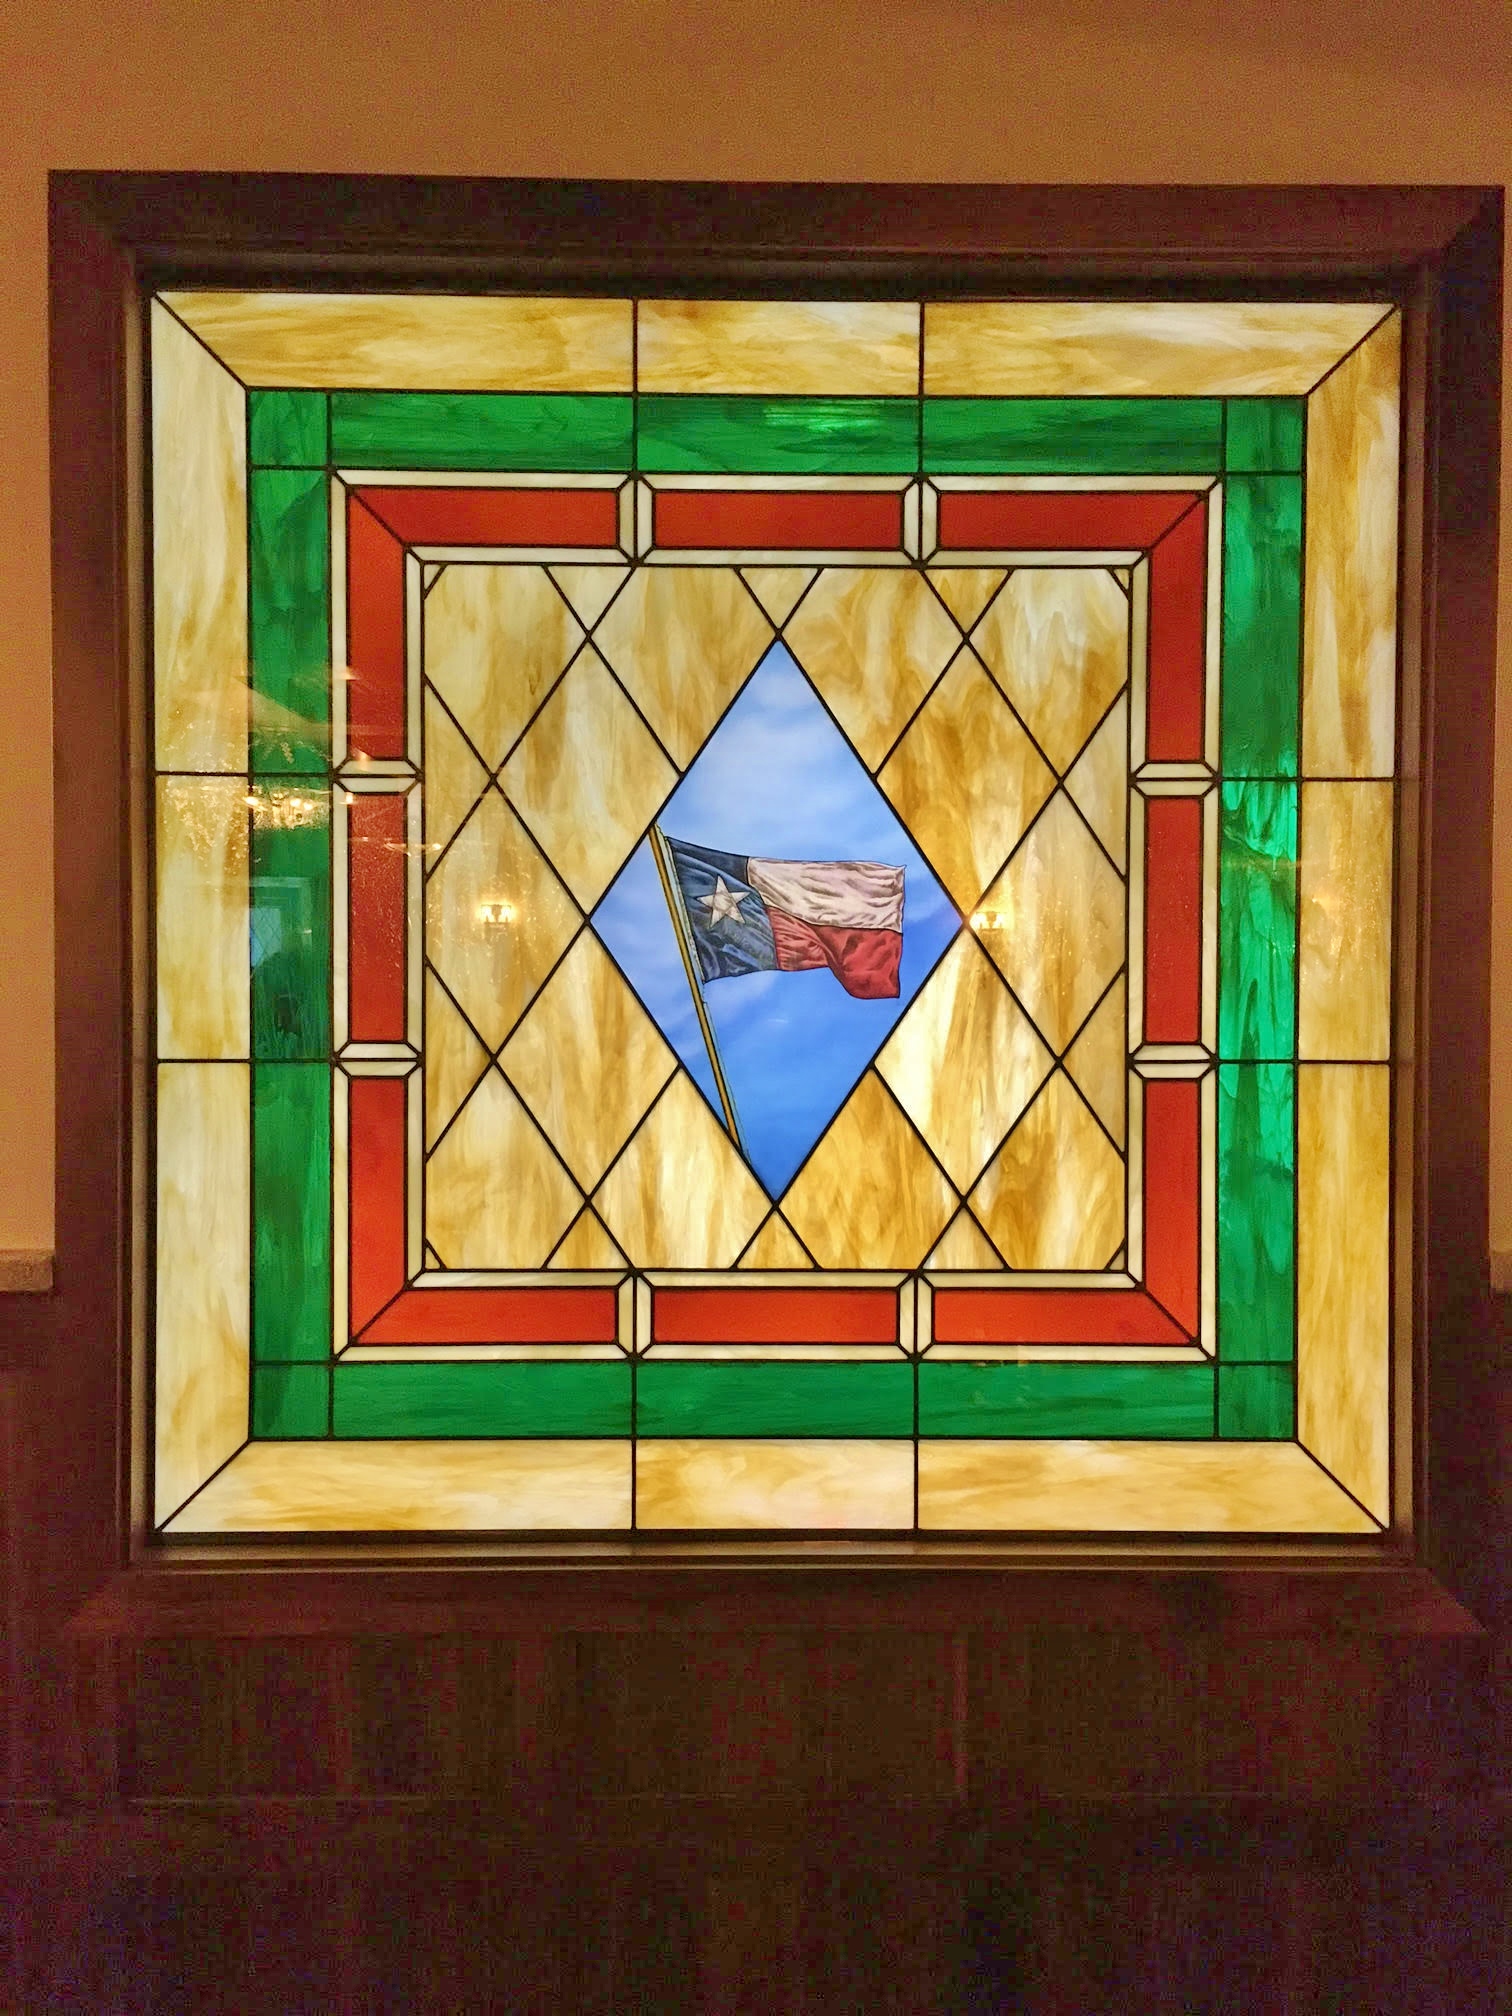 university of texas stained glass